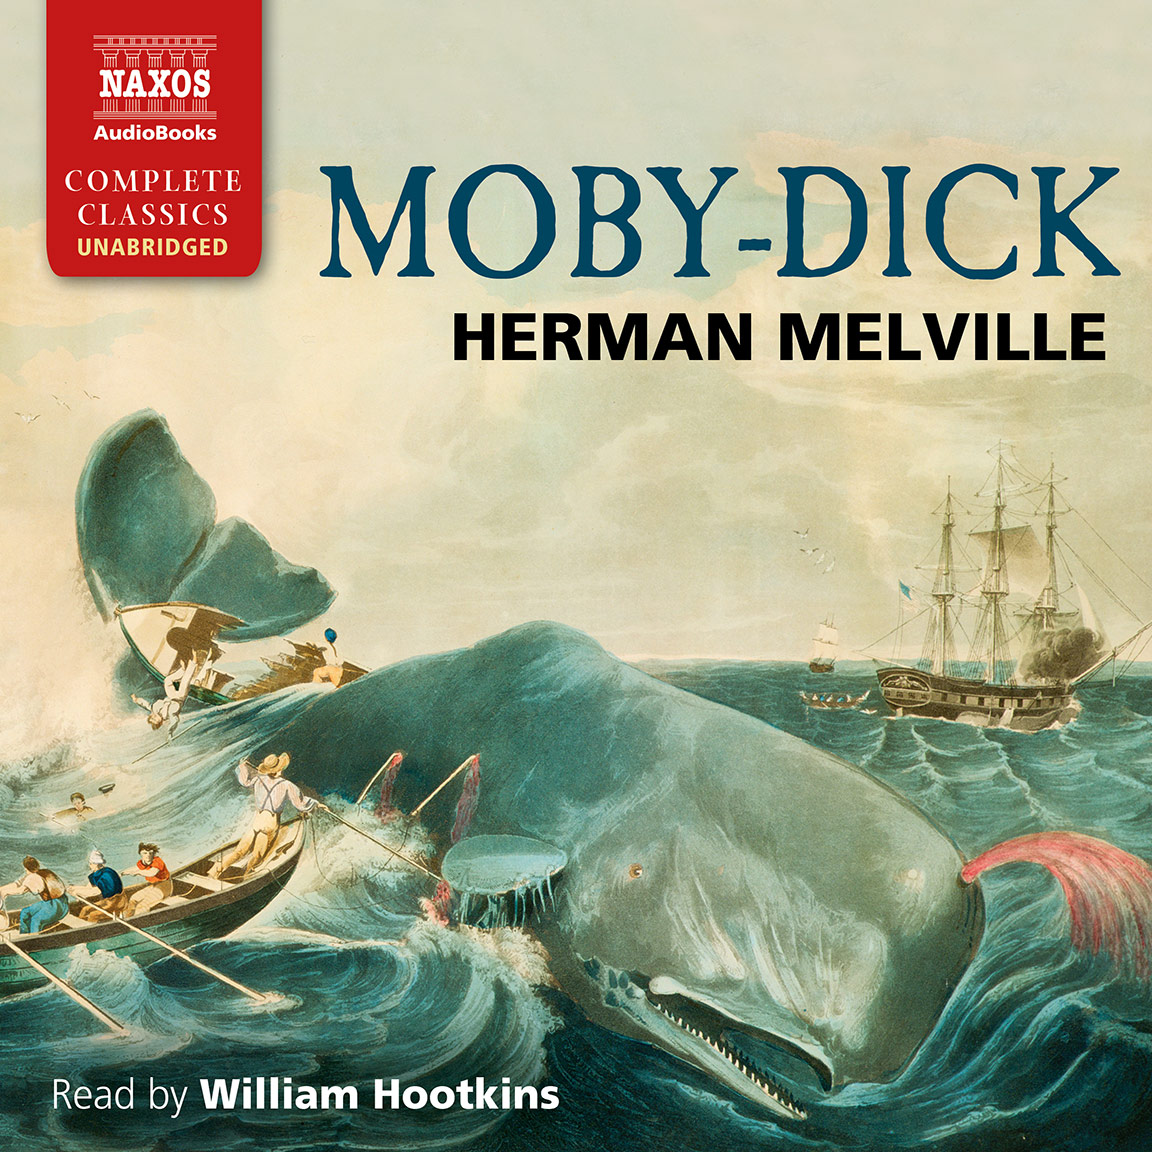 Moby Dick (unabridged)